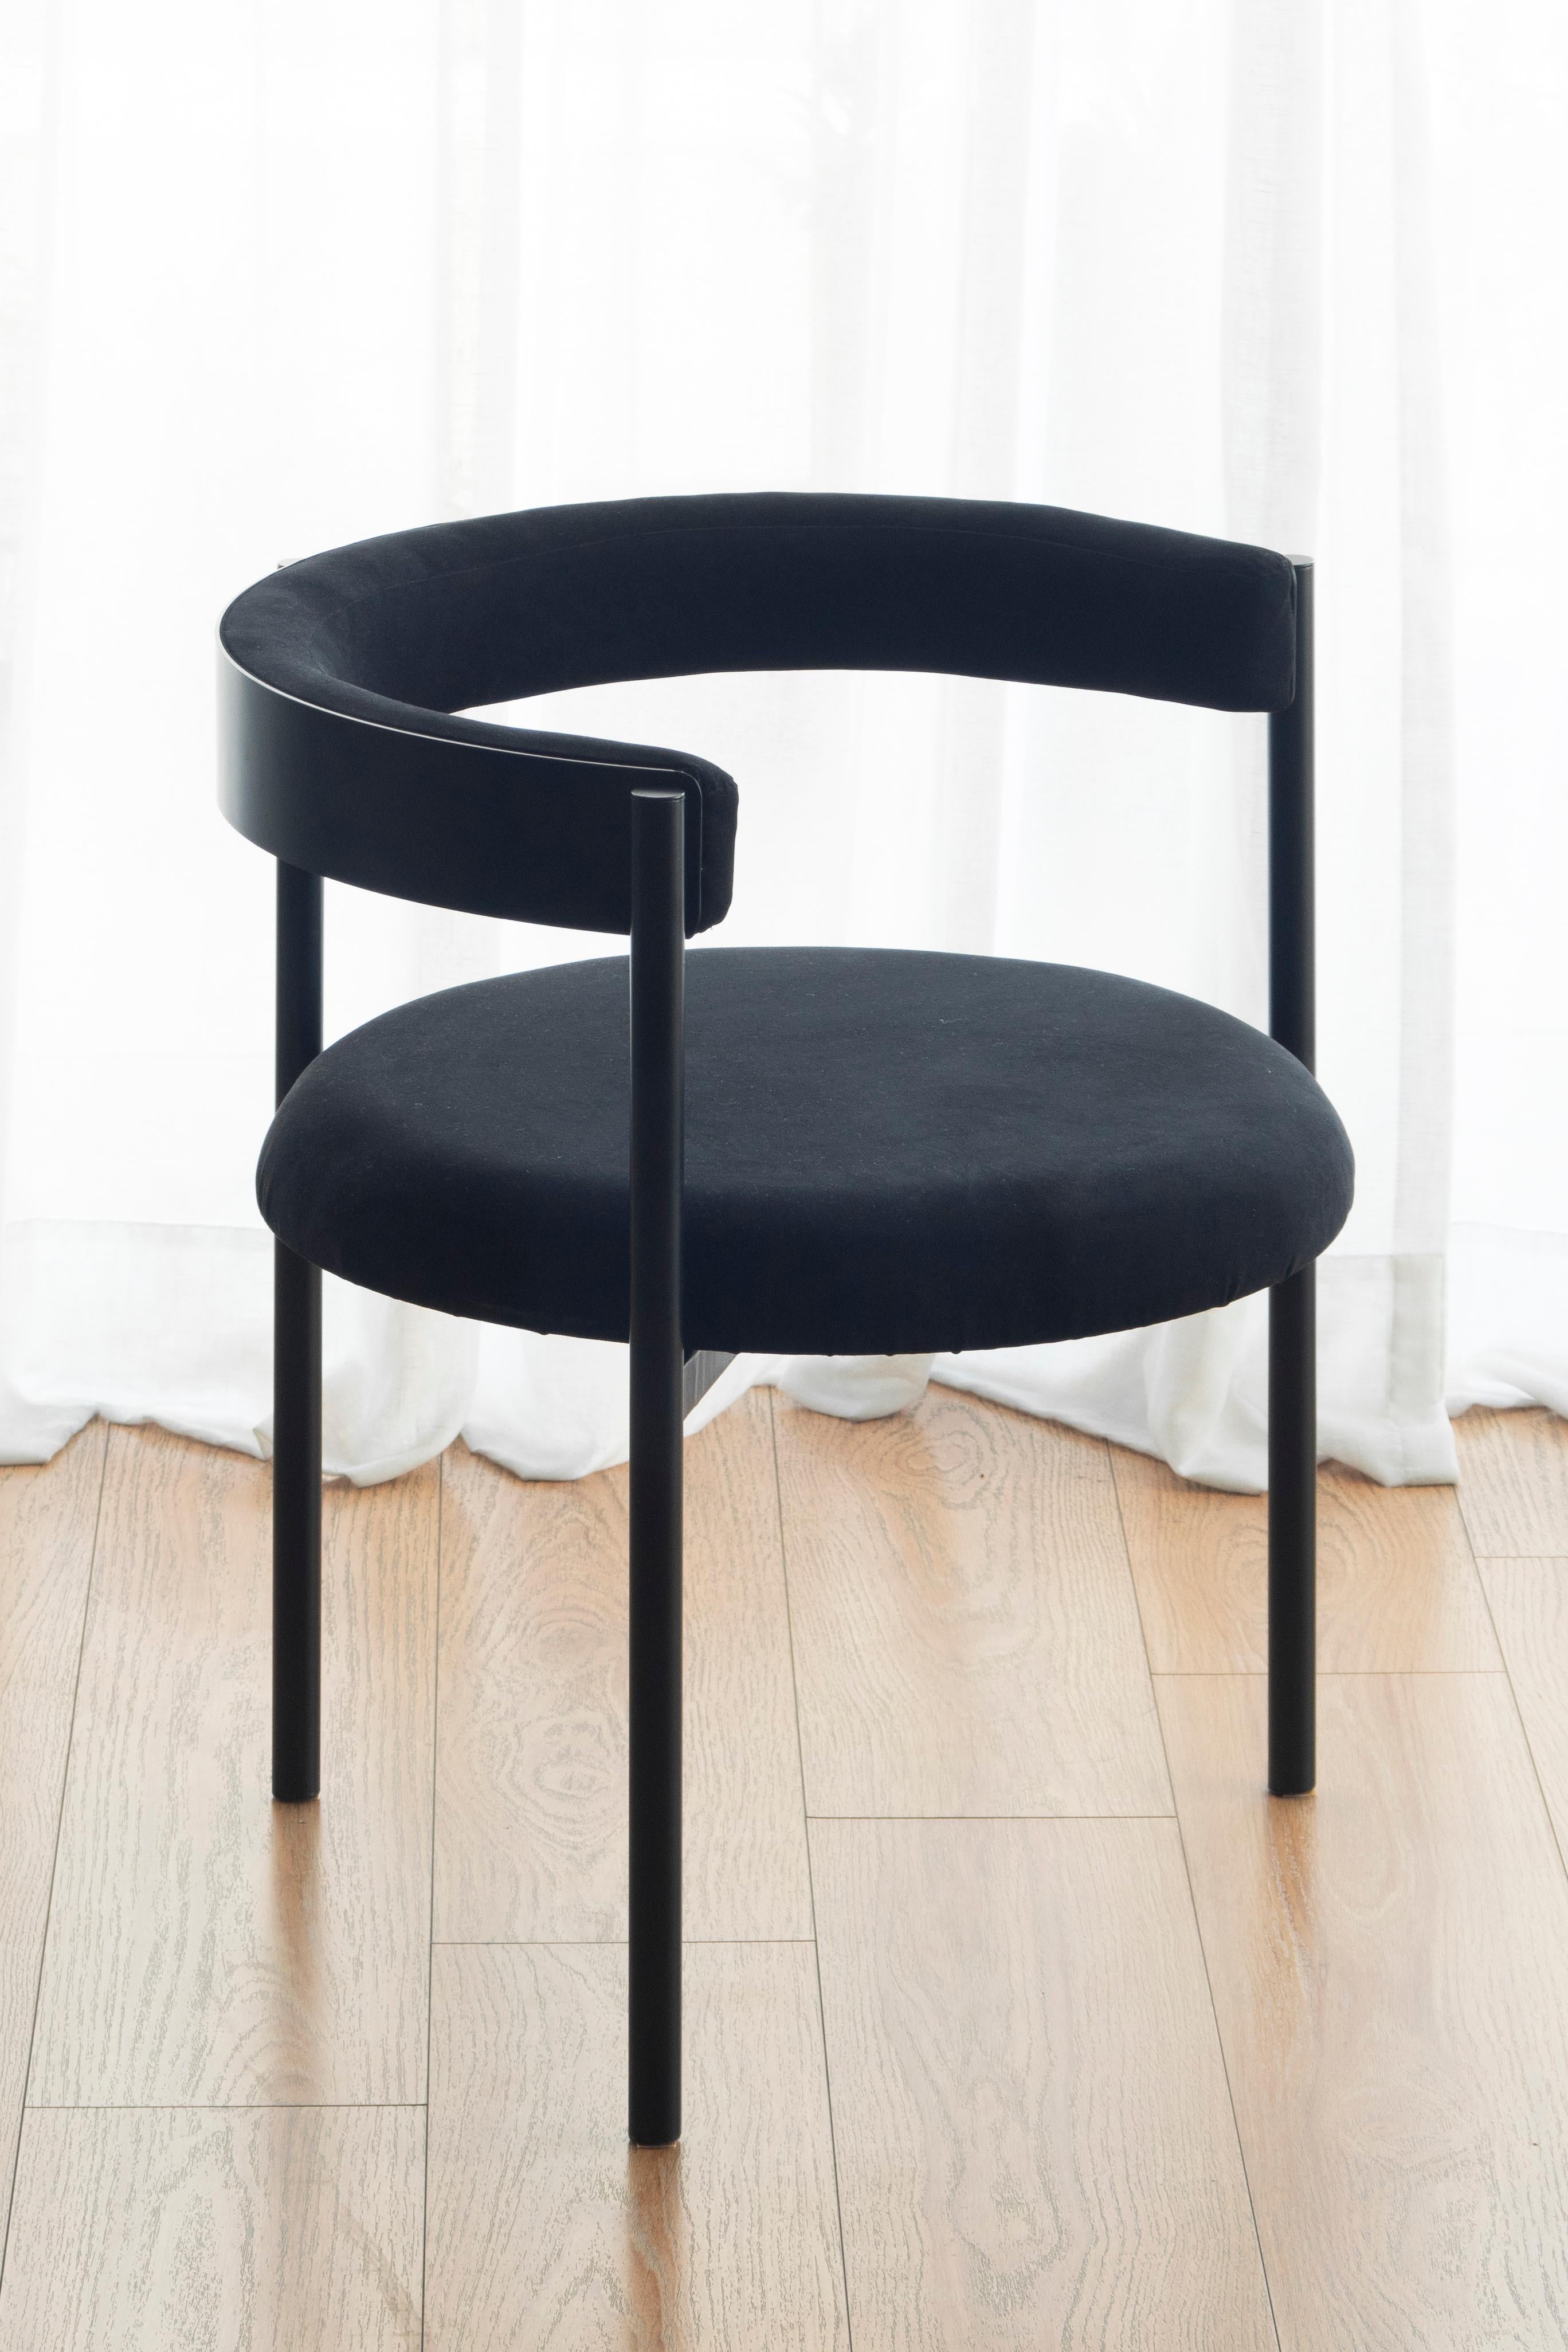 Aro chair, black by Ries
Dimensions: W60 x D60 x H67,5 cm 
Materials: Round steel tube, high-density foam, and velvet upholstery

Also available: Merlot, dark blue, mika, oceano, pink and yellow

Ries is a design studio based in Buenos Aires,